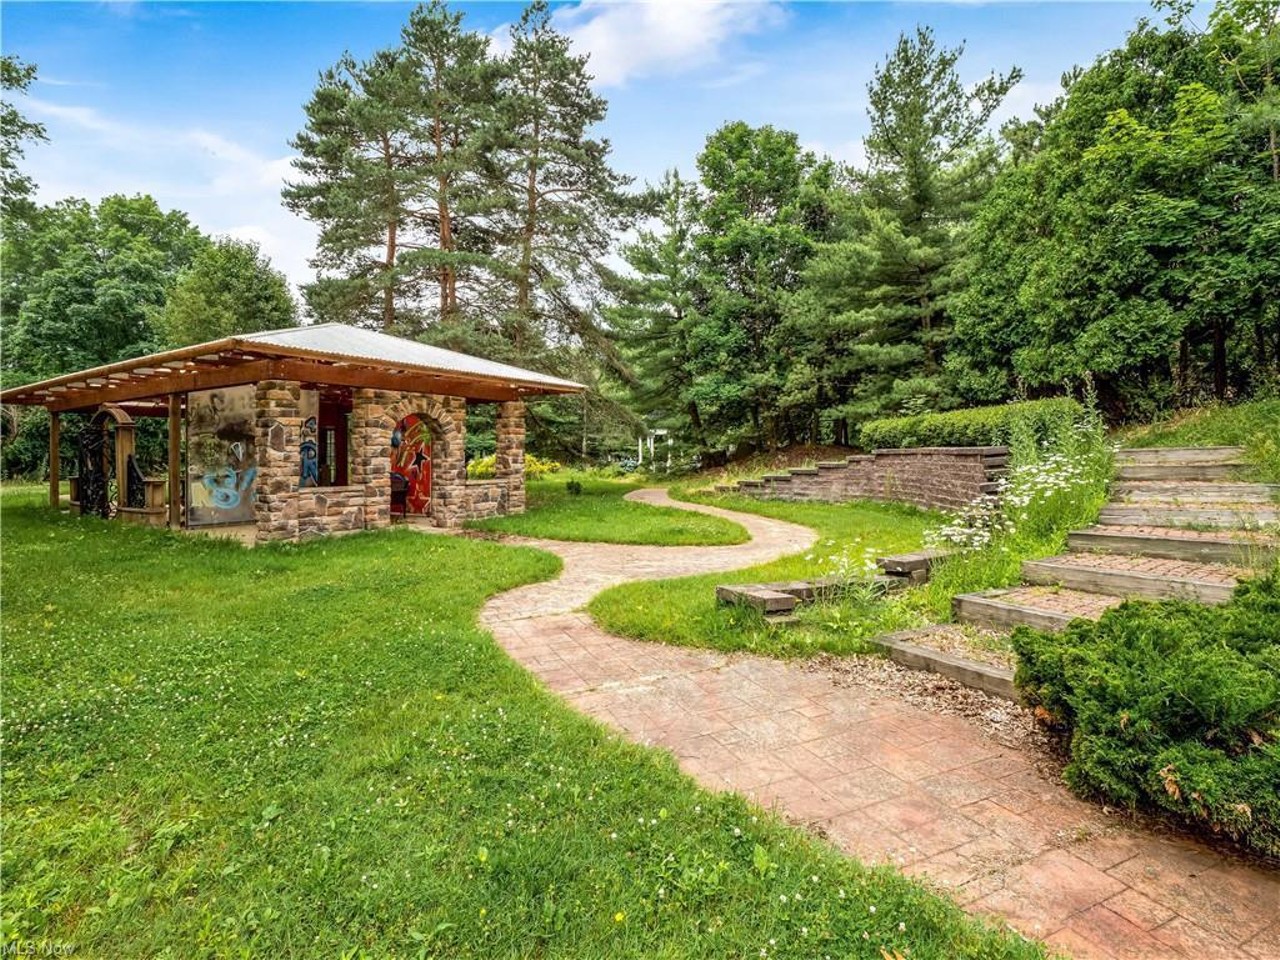 This $400,000 North Royalton Fixer-Upper Basically Has A Park For Its Backyard